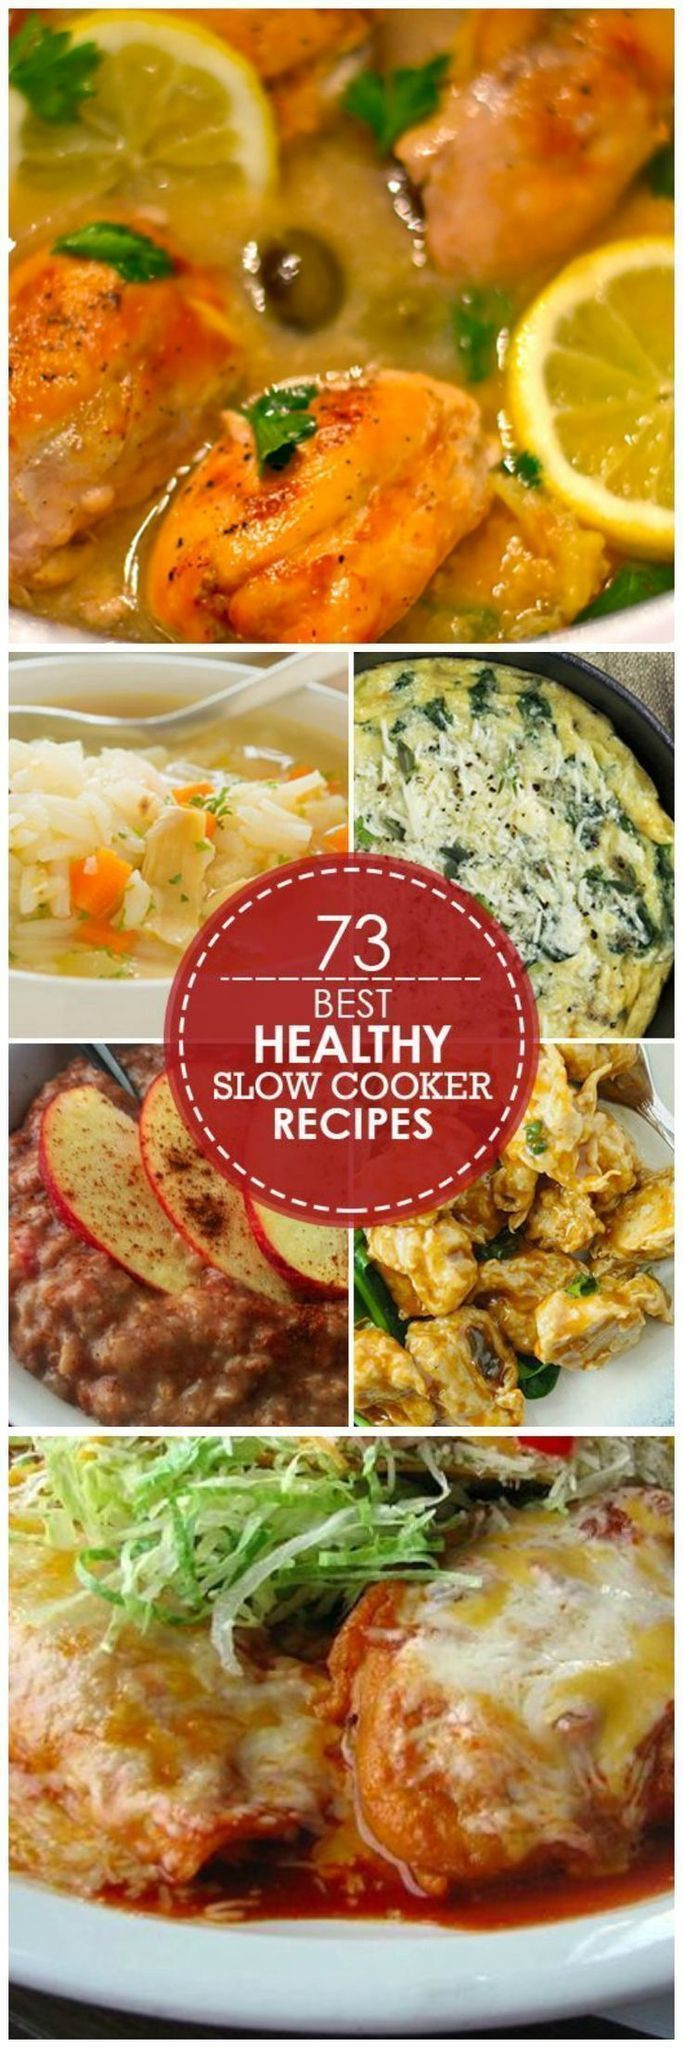 Best Healthy Slow Cooker Recipes
 73 Best Slow Cooker Recipes